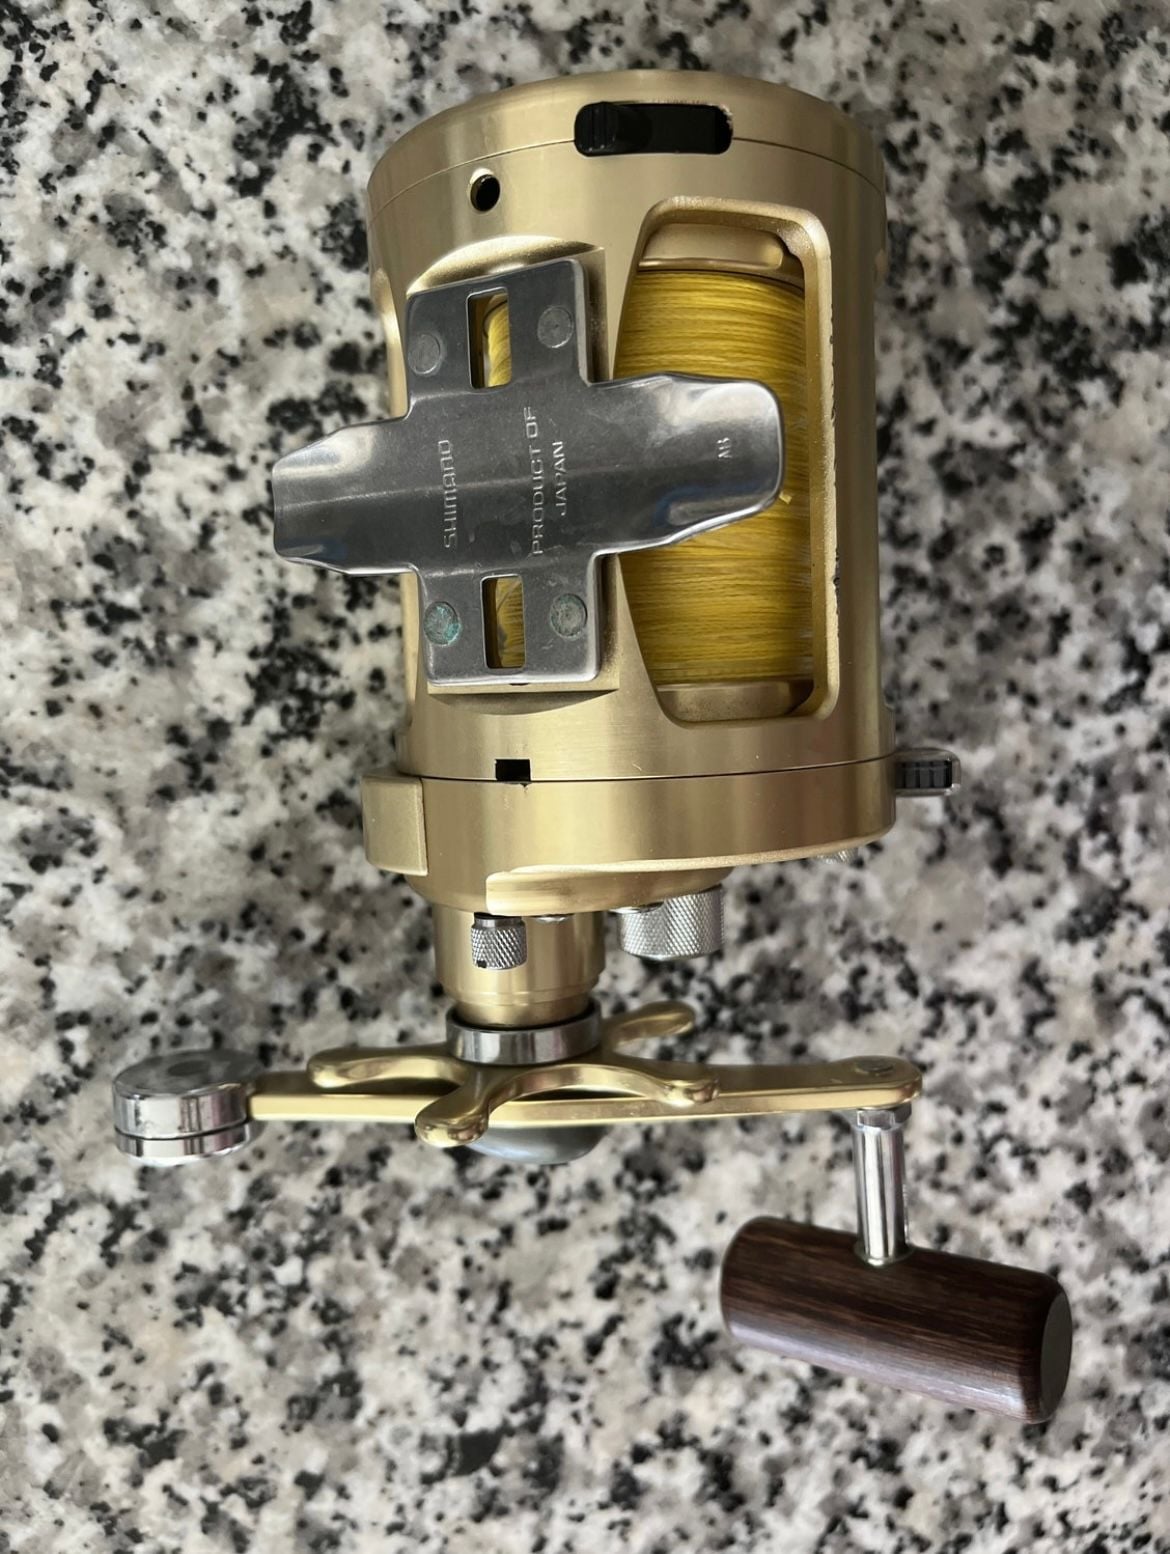 Shimano Calcutta 700 only 1 left $ 195 - Classifieds - Buy, Sell, Trade or  Rent - Great Lakes Fisherman - Trout, Salmon & Walleye Fishing Forum